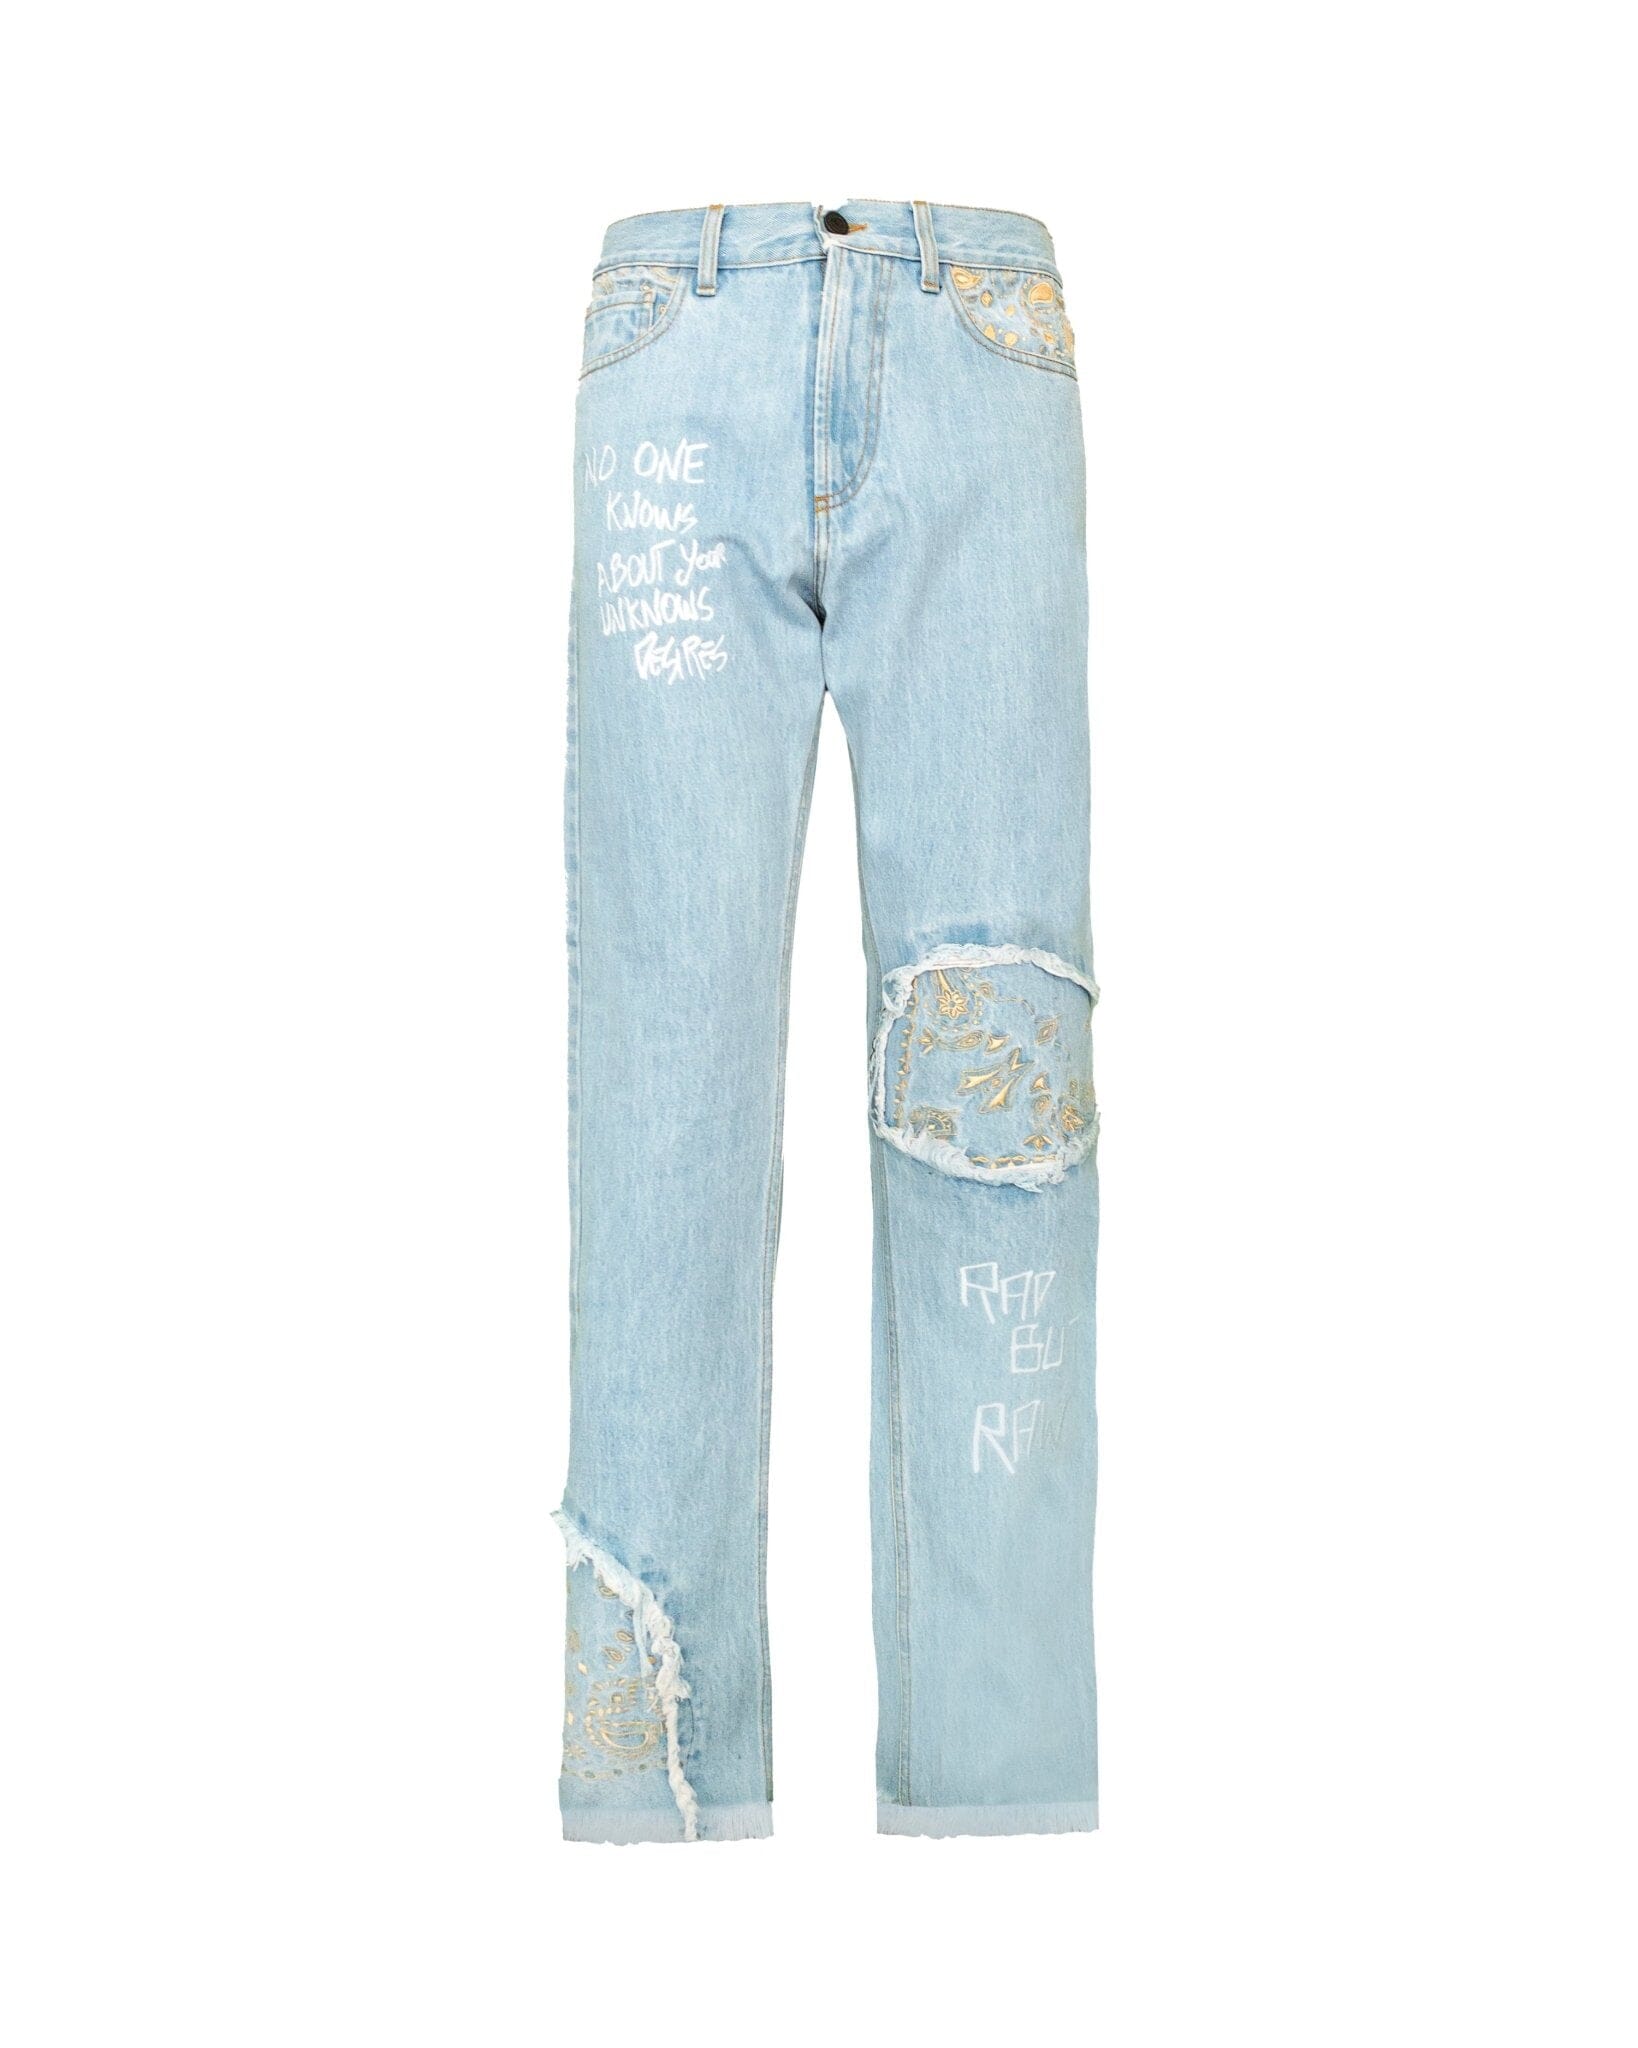 Jeans Straight Baggy embroidered bandana blue